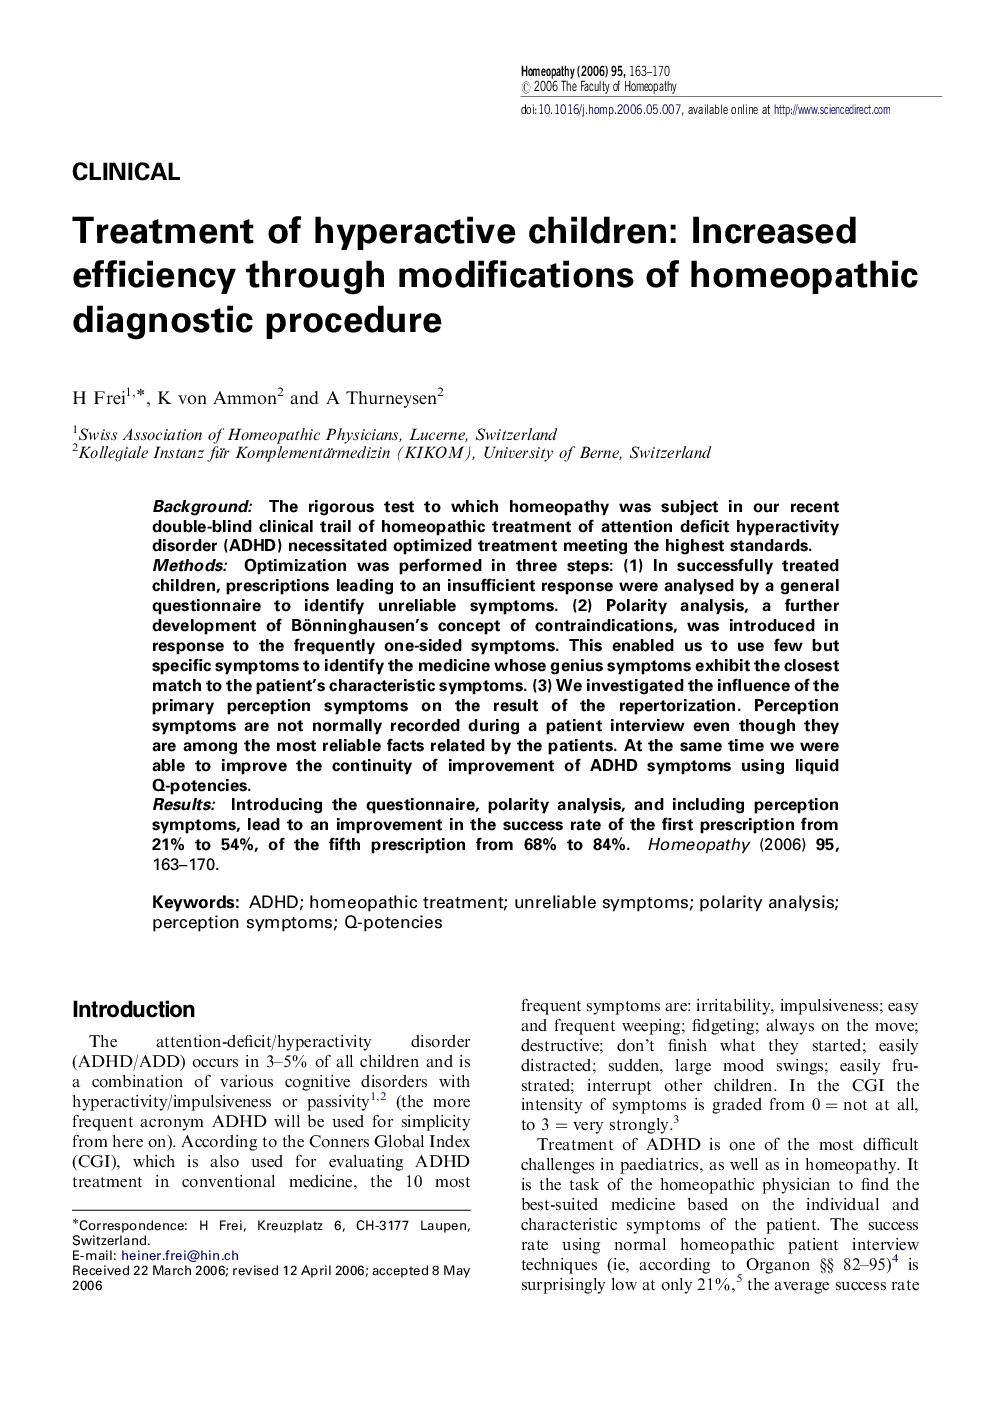 Treatment of hyperactive children: Increased efficiency through modifications of homeopathic diagnostic procedure